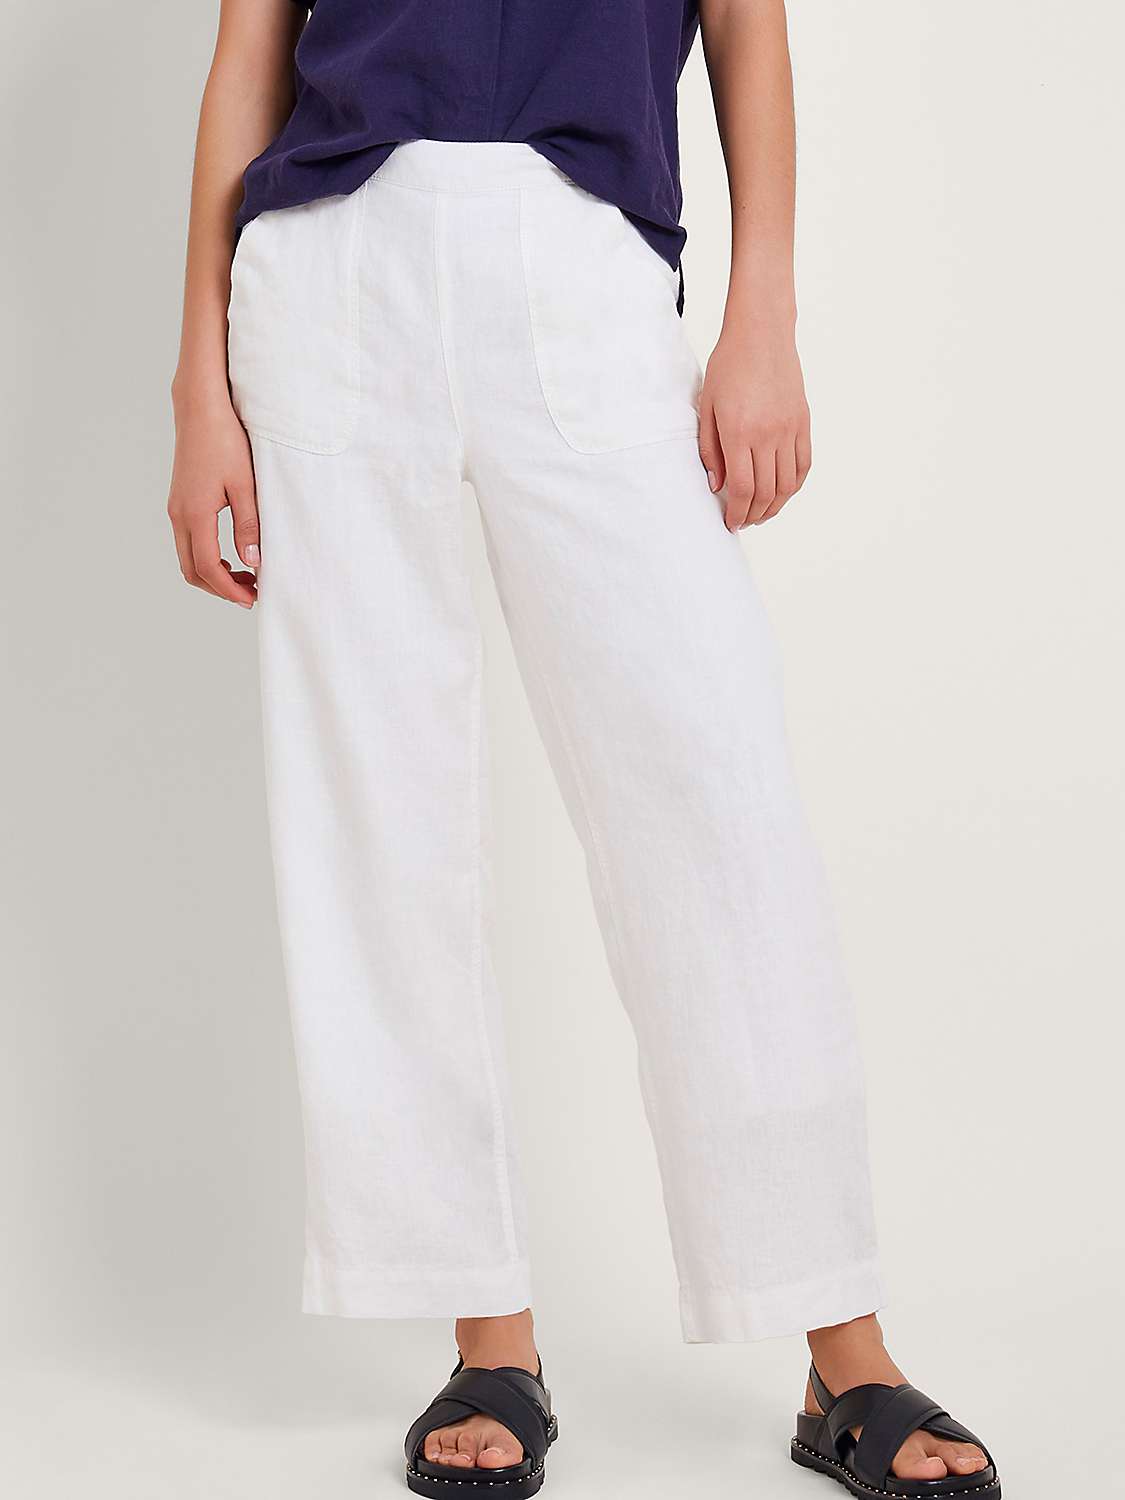 Buy Monsoon Parker Linen Cropped Trousers, White Online at johnlewis.com